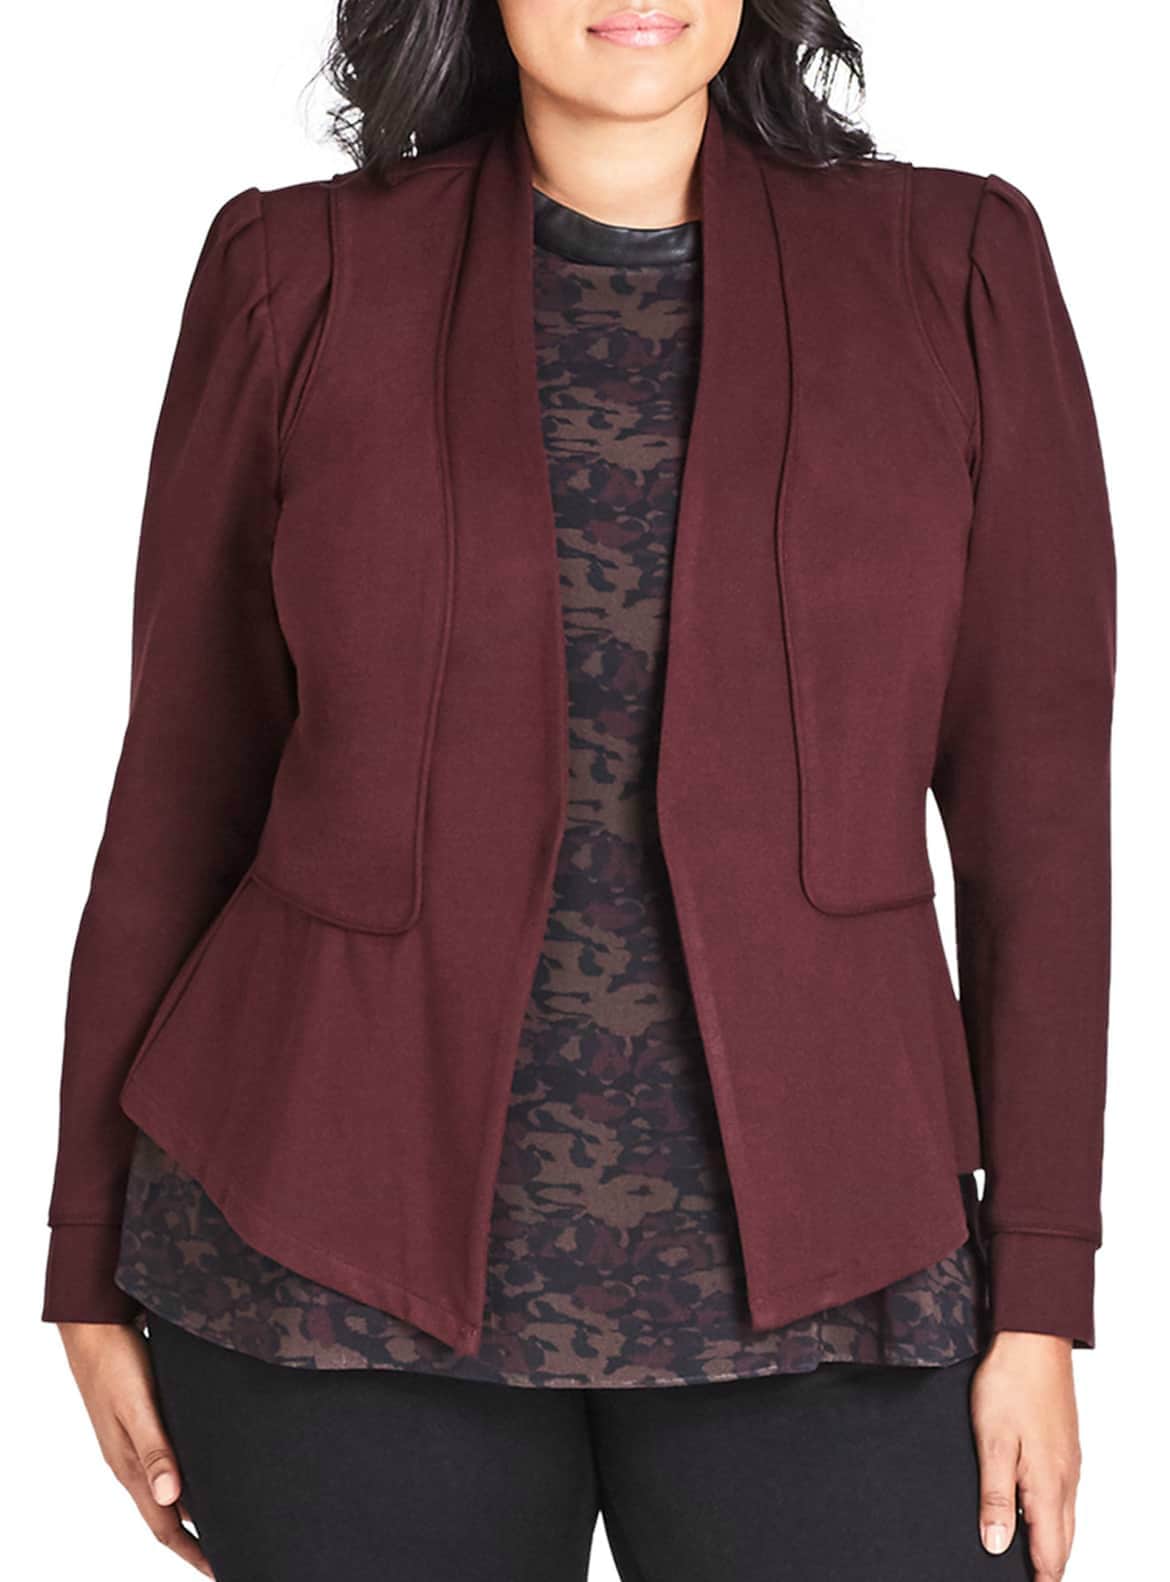 soft knit jacket City Chic from Nordstrom on A Well Styled Life